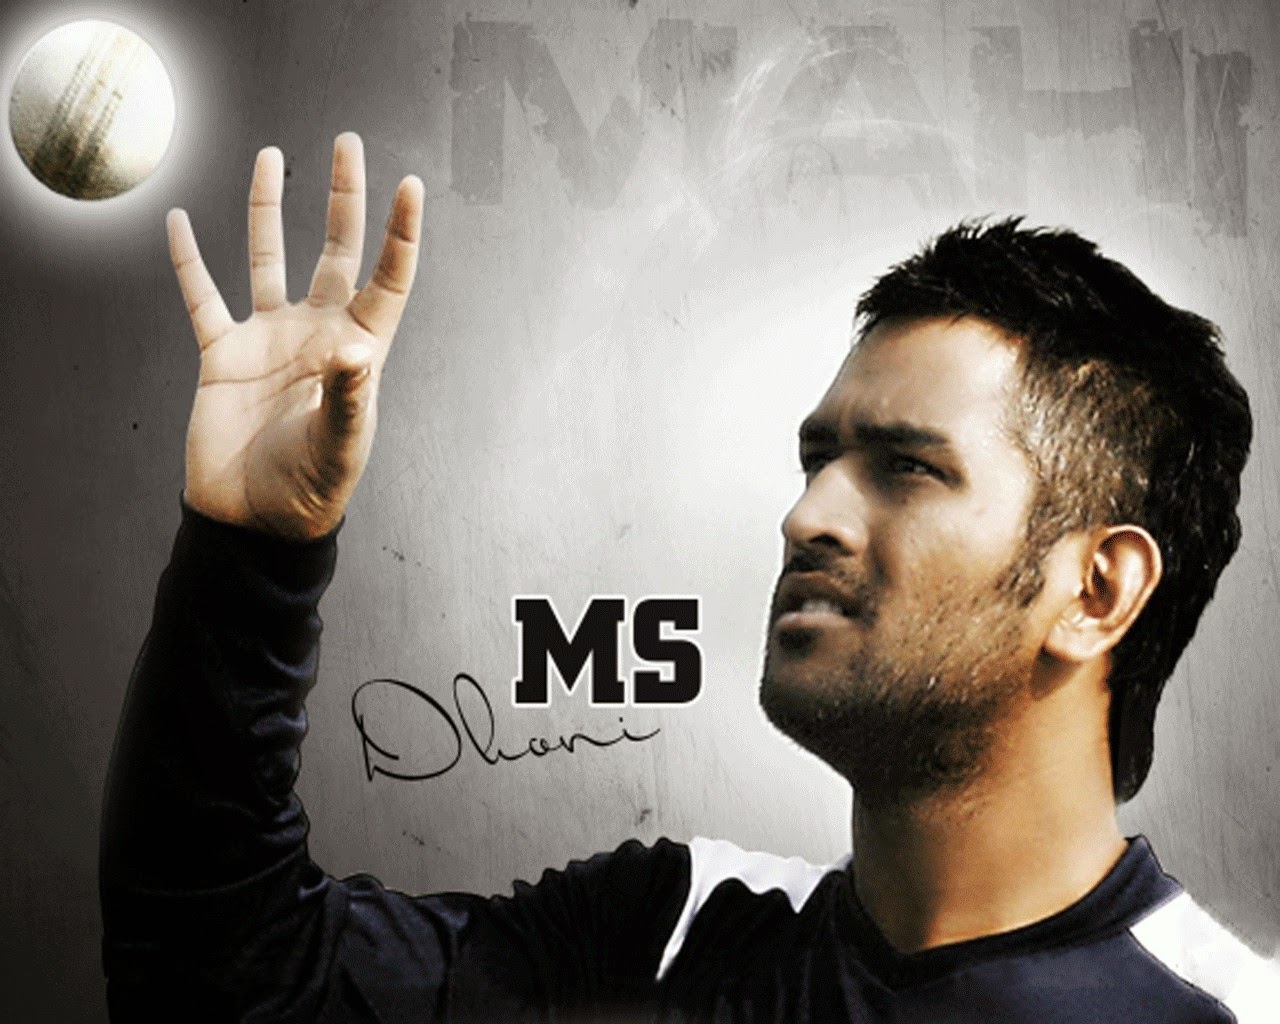 ms dhoni hd壁紙,額,涼しい,ジェスチャー,フォント,手